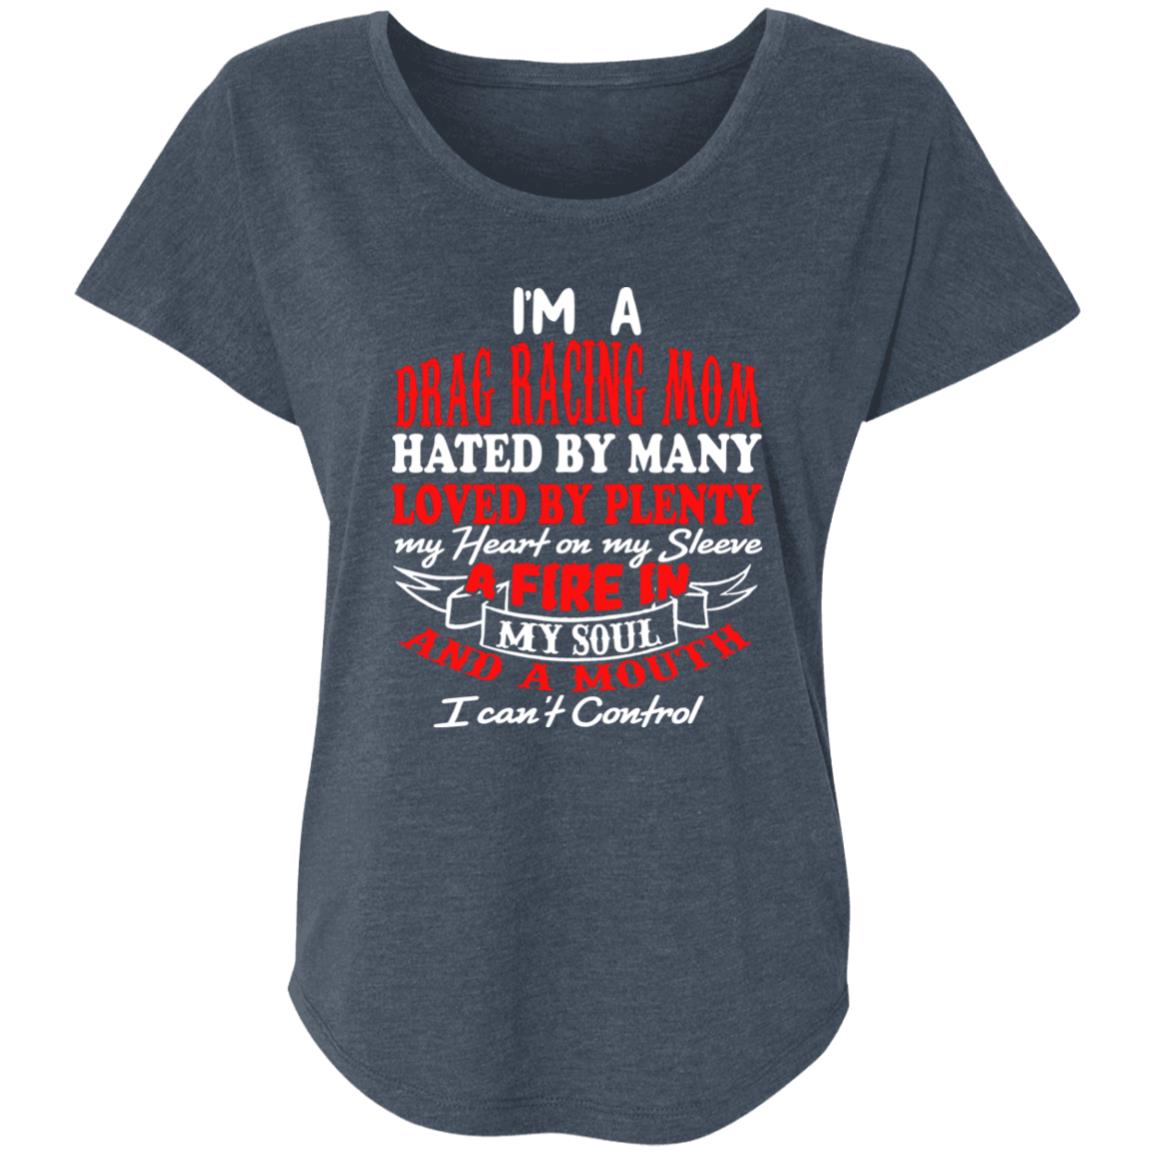 I'm A Drag Racing Mom Hated By Many Loved By Plenty Ladies' Triblend Dolman Sleeve